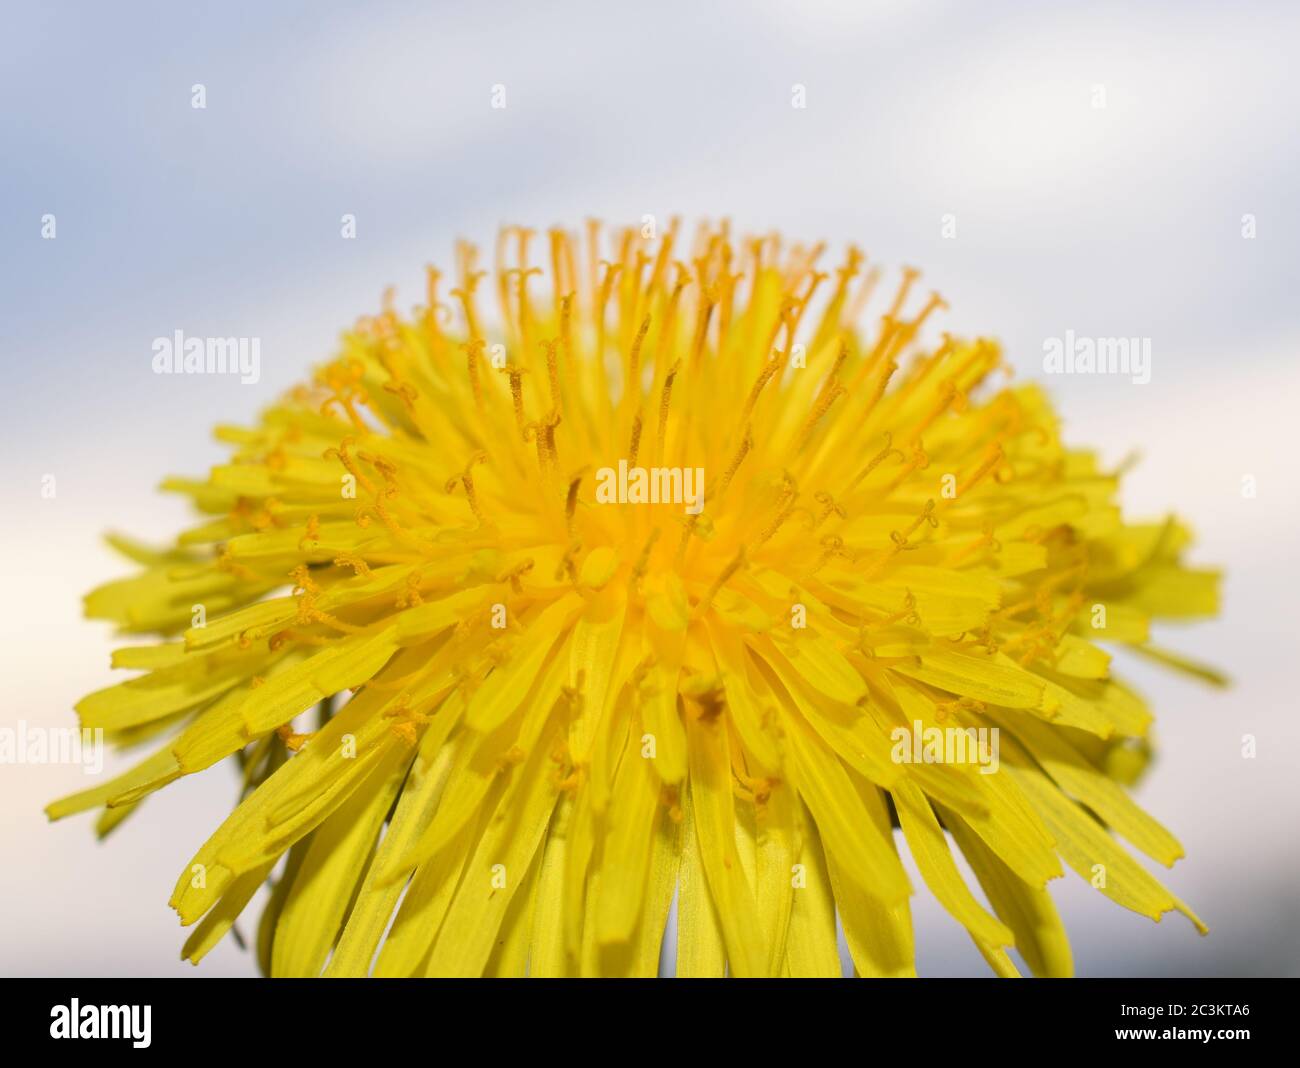 Closeup on a bright yellow dandelion flower on sky background Stock Photo